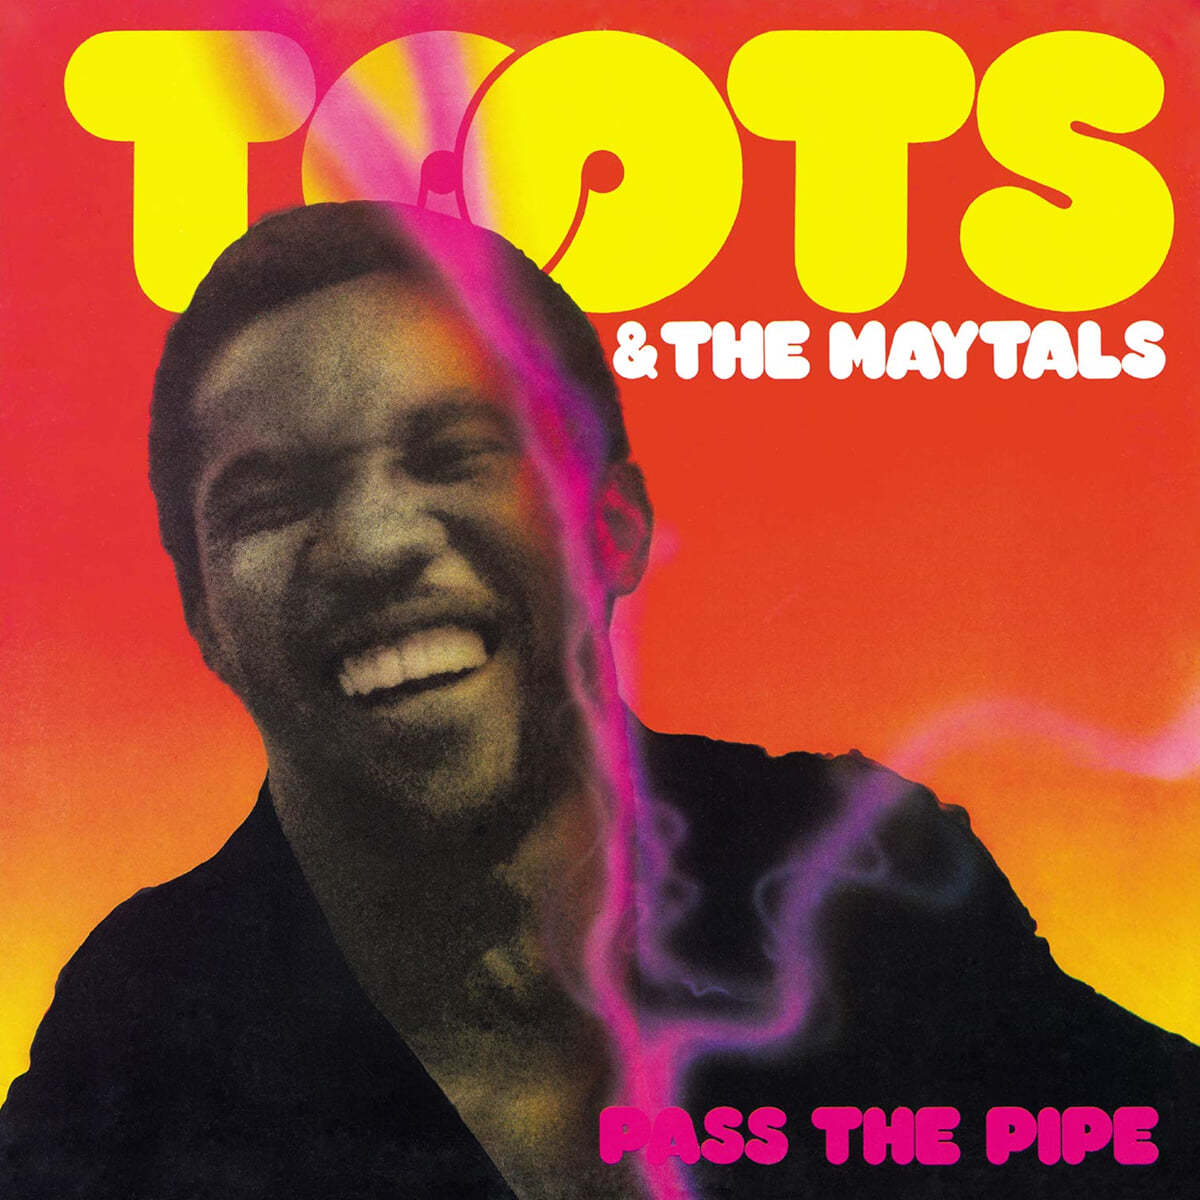 Toots & The Maytals (투츠 앤드 더 메이털스) - Pass The Pipe [LP] 